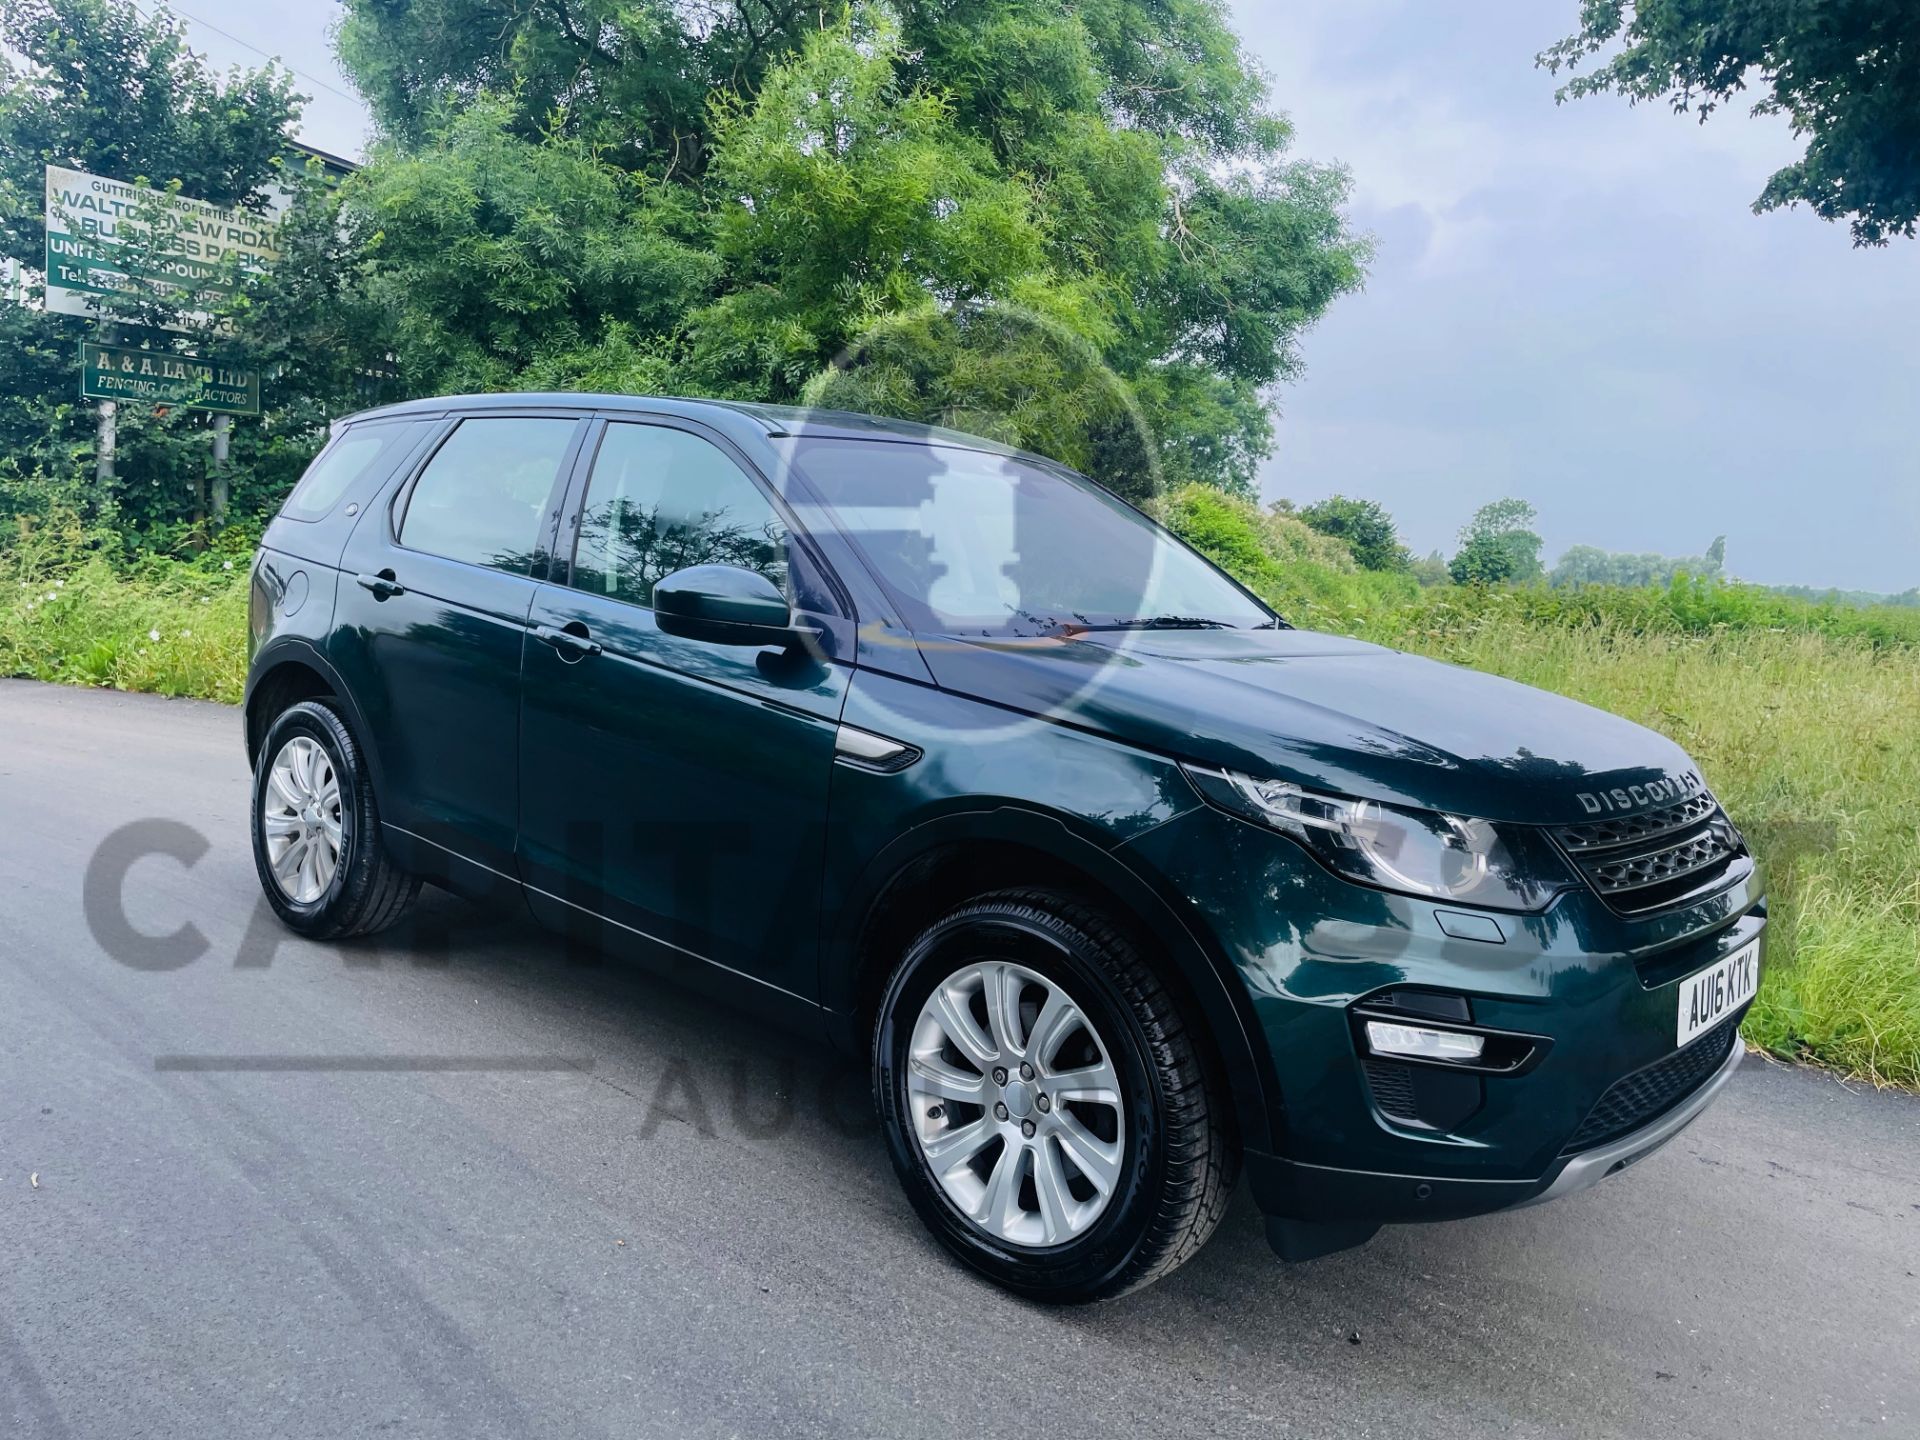 LAND ROVER DISCOVERY SPORT *SE TECH* 7 SEATER SUV (2016) 2.0 TD4 - AUTO *LEATHER & NAV* (NO VAT) - Image 3 of 54